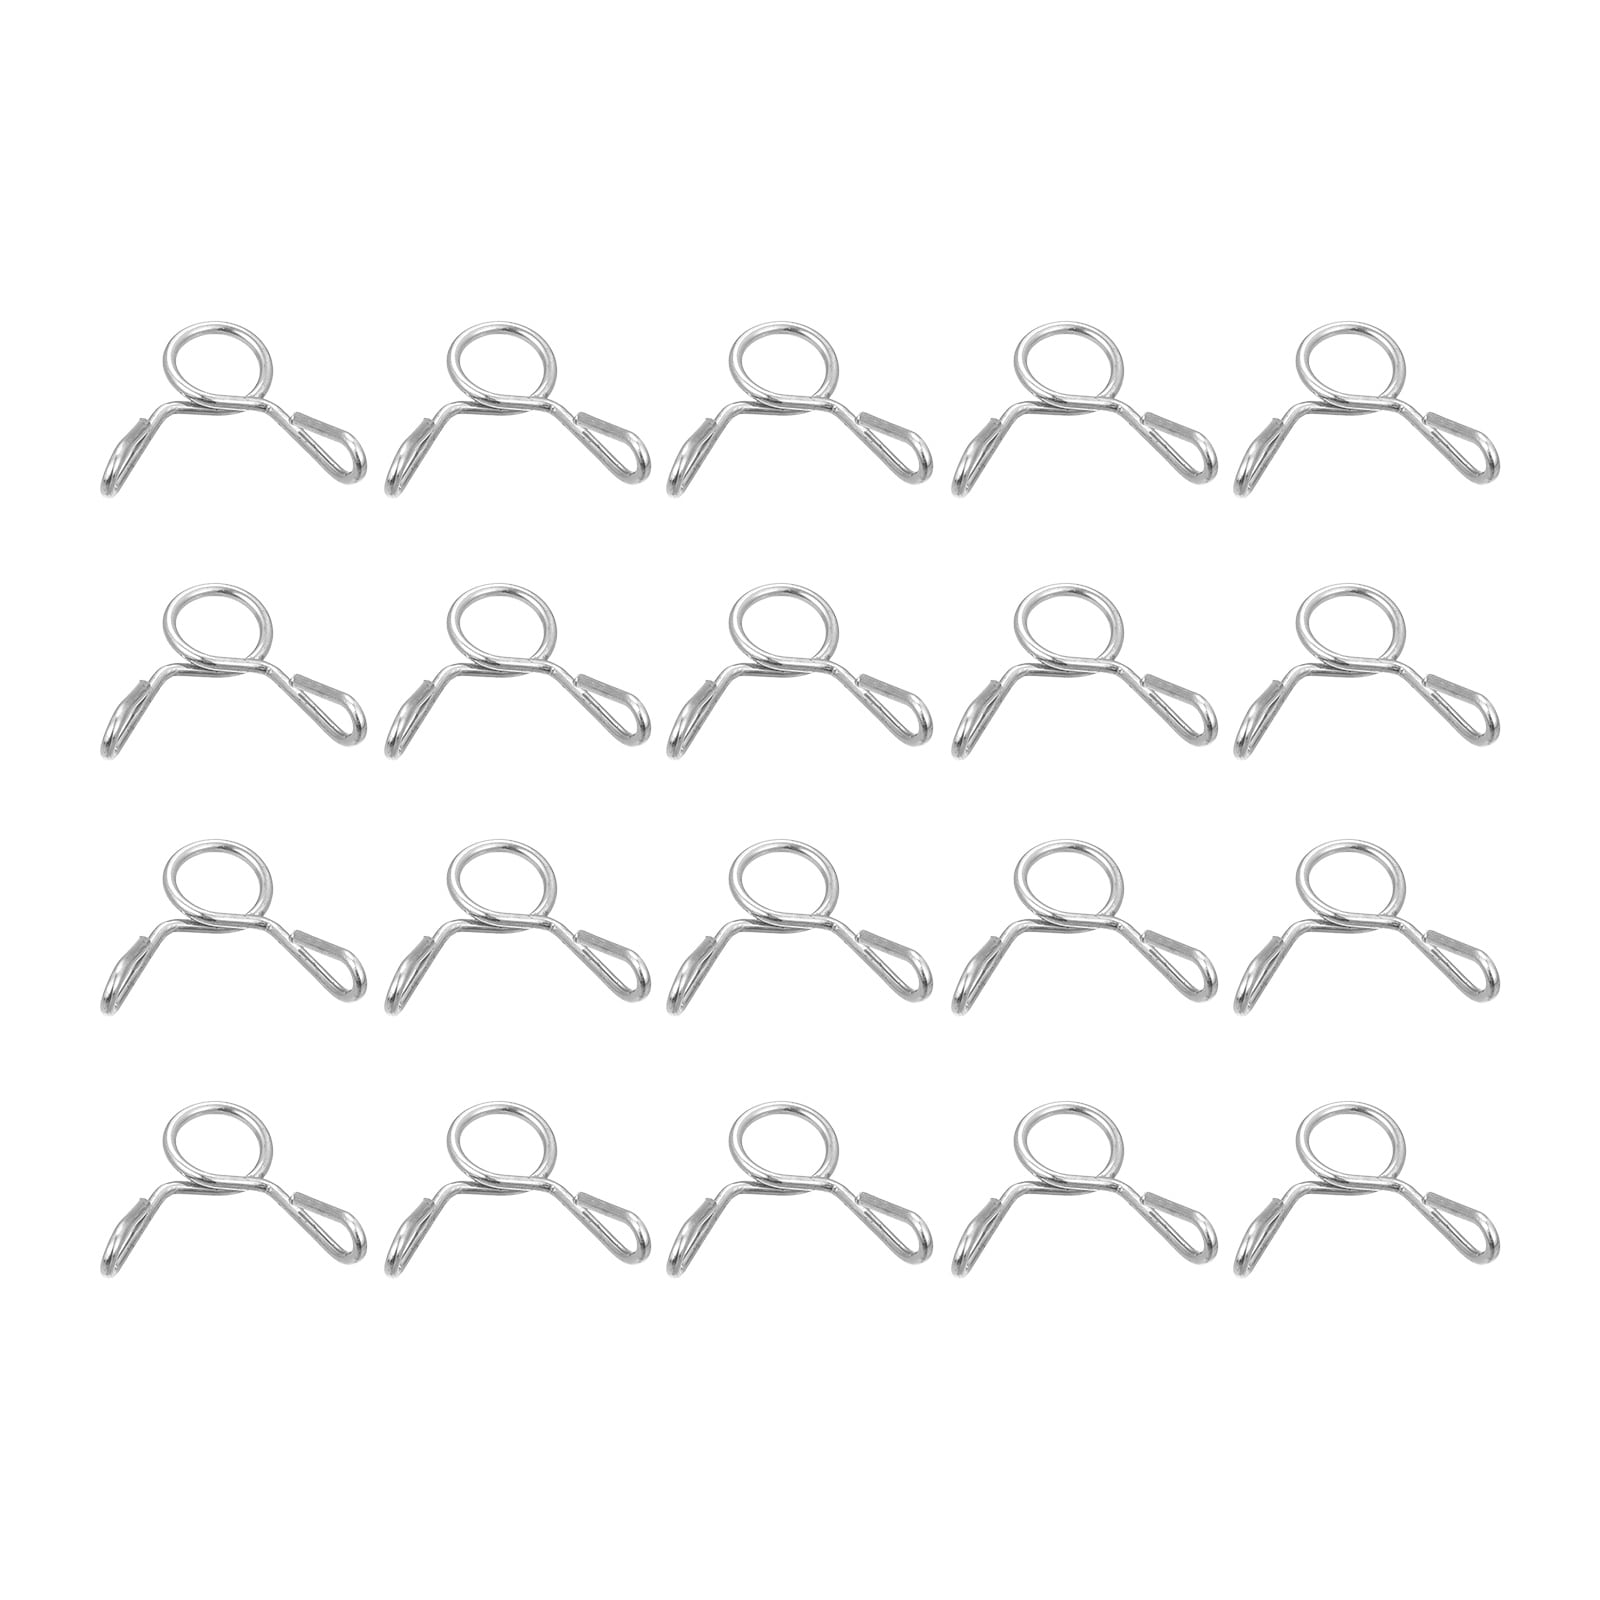 Hose Spring Clamp for OD 13mm (1/2in) - [10 Pack]